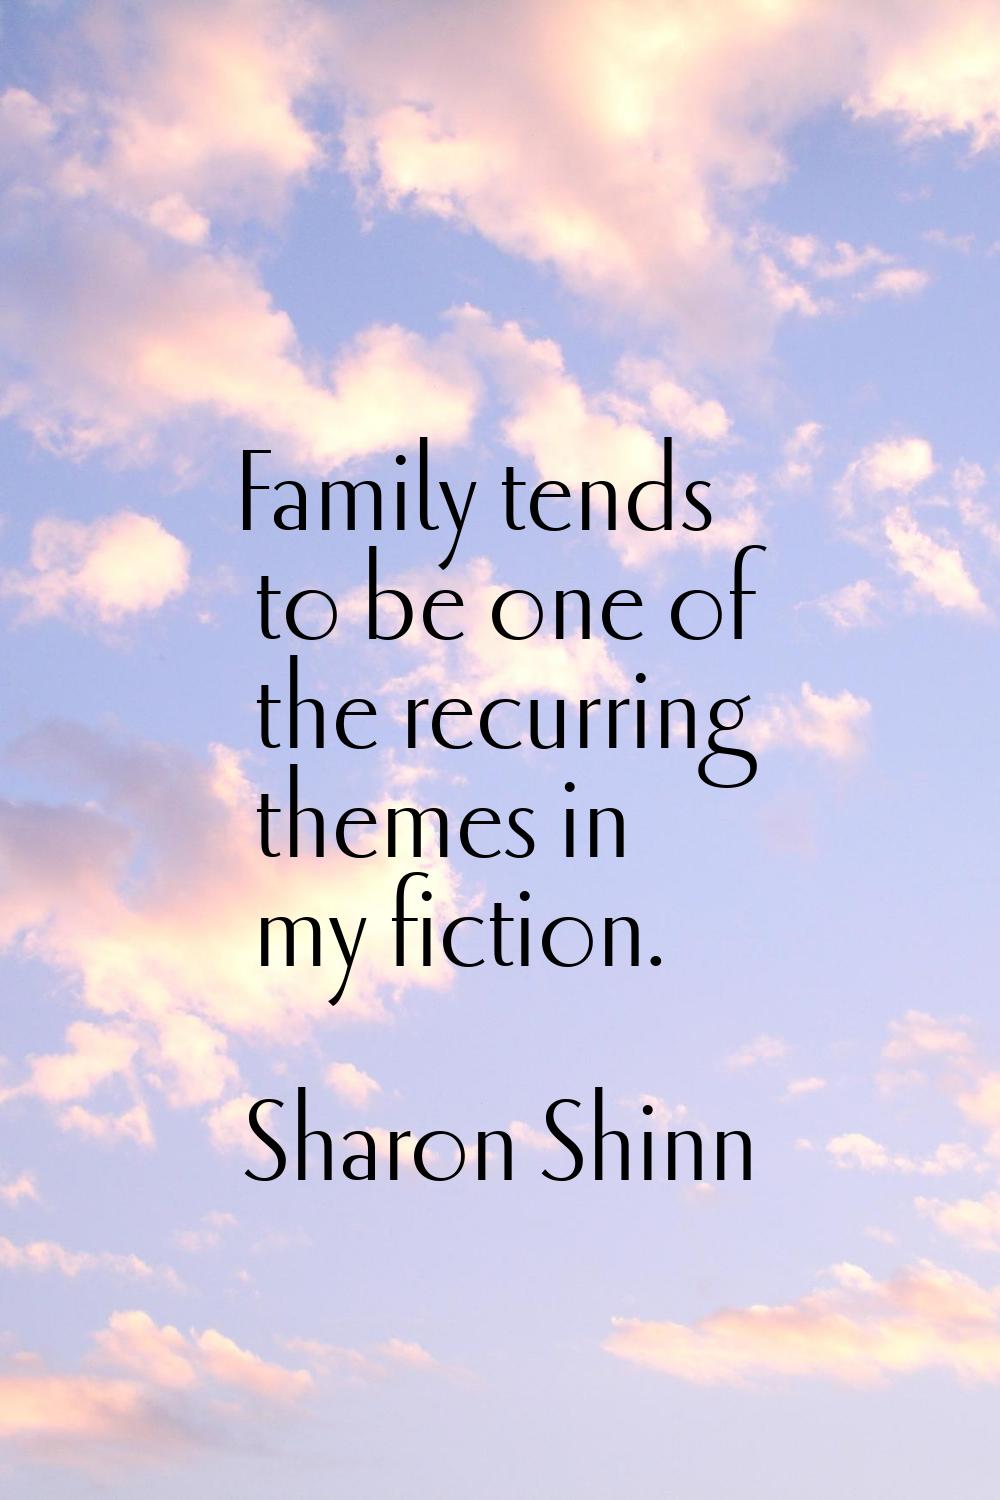 Family tends to be one of the recurring themes in my fiction.